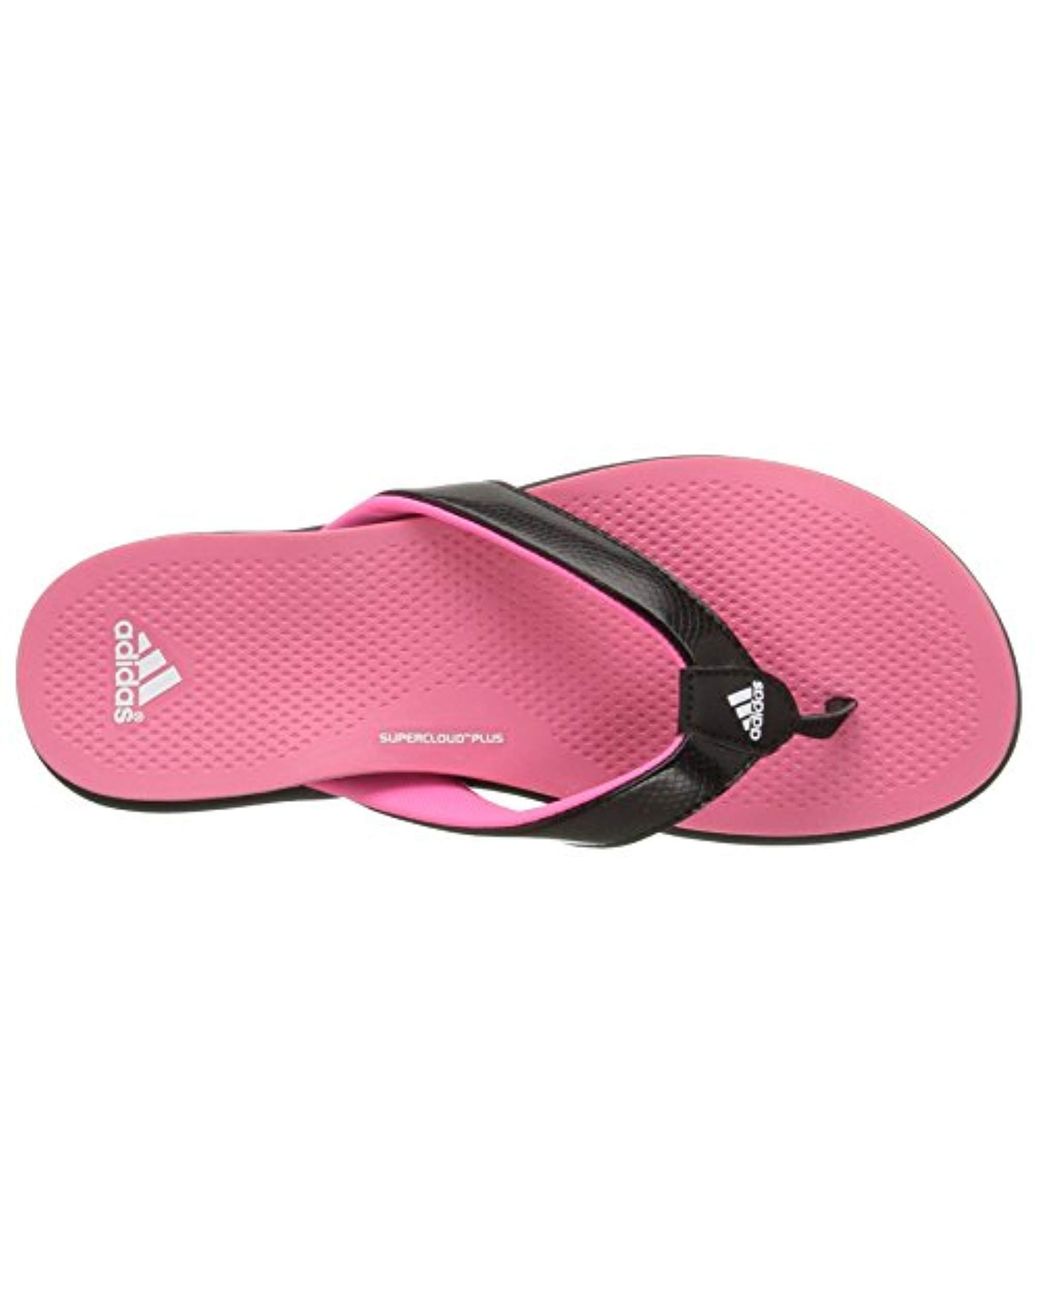 adidas Supercloud Plus Thong Athletic Running Shoe in Pink | Lyst